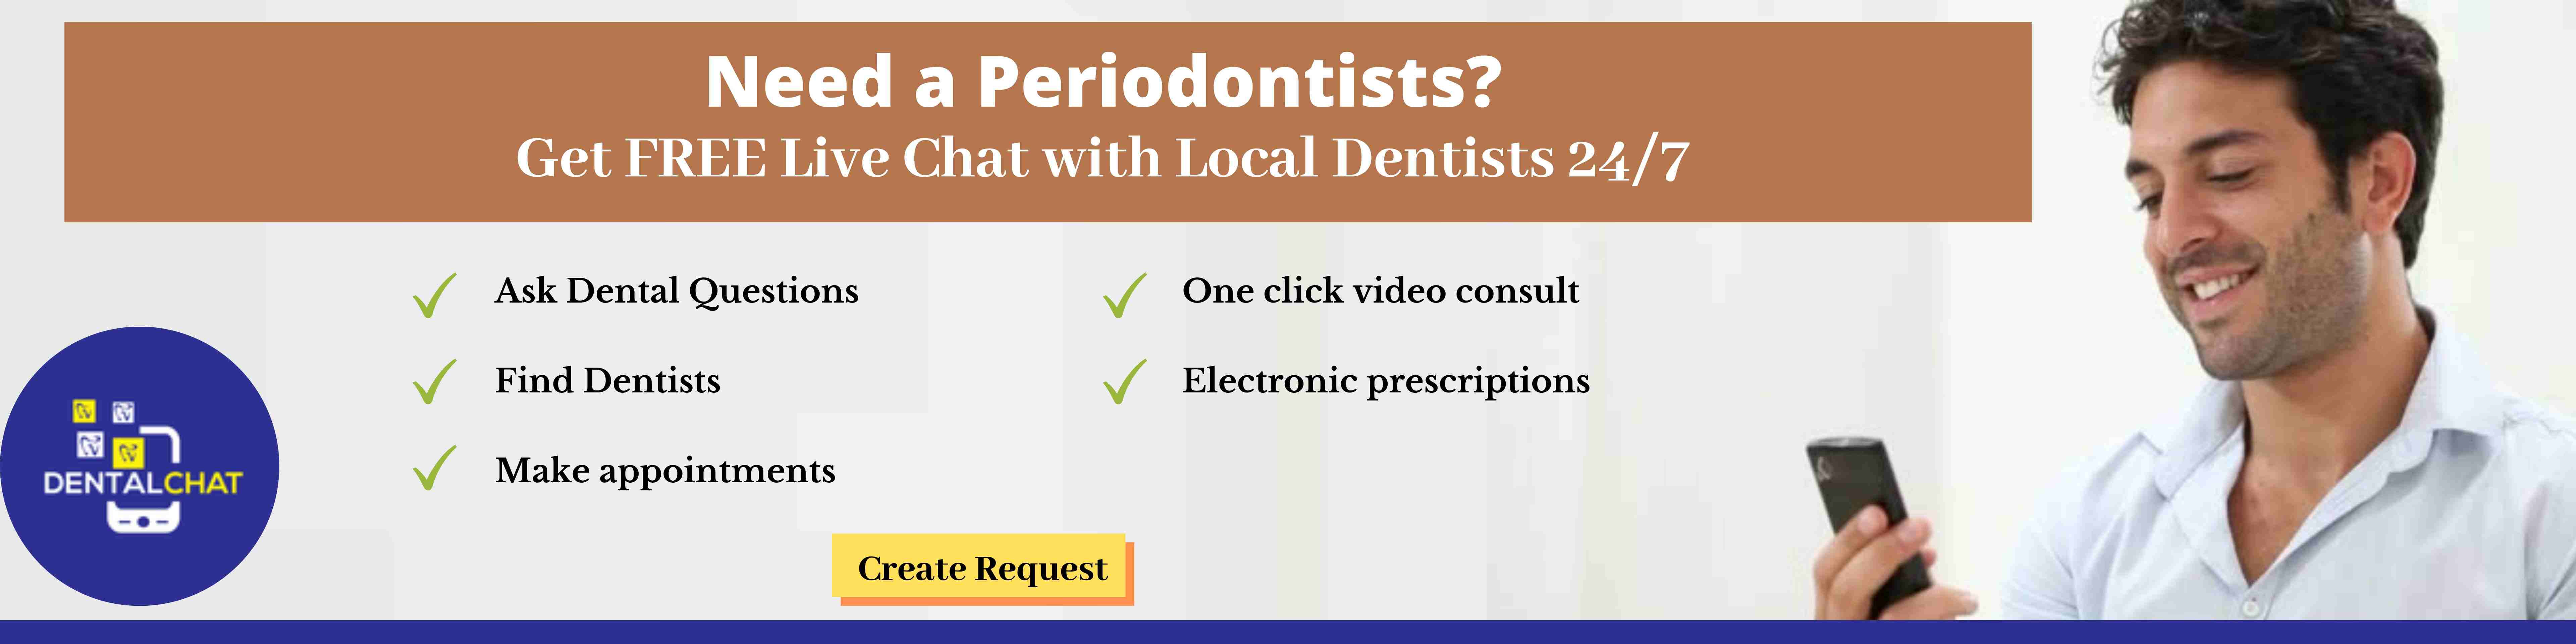 Periodontics chatting, perio treatment chat, local periodontist blog, and online periodontitis chatting